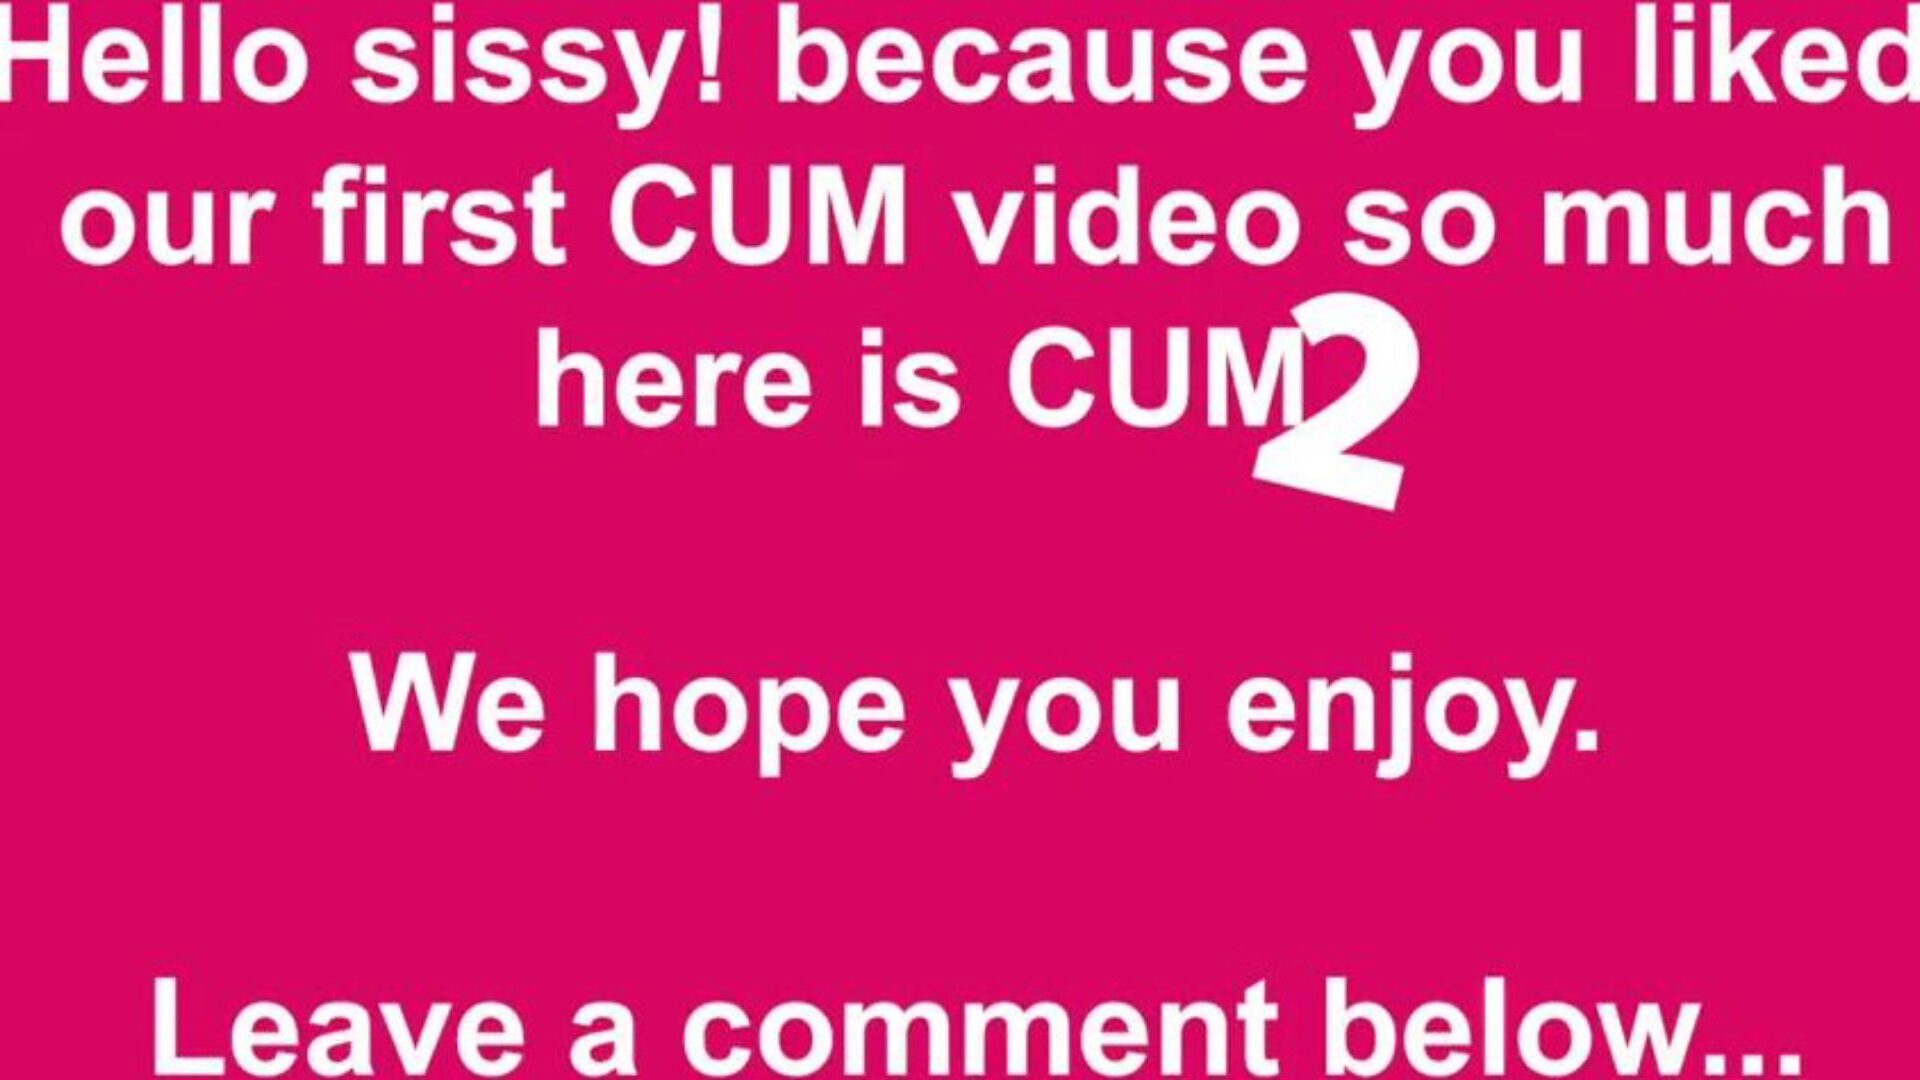 cum 2 vapaa cum & cumming tube porn video 49 - xhamster watch cum 2 tube hook-up episode for free on xhamster, with the dominant bey of free cum cumming tube & tube two hd porn episode keikat